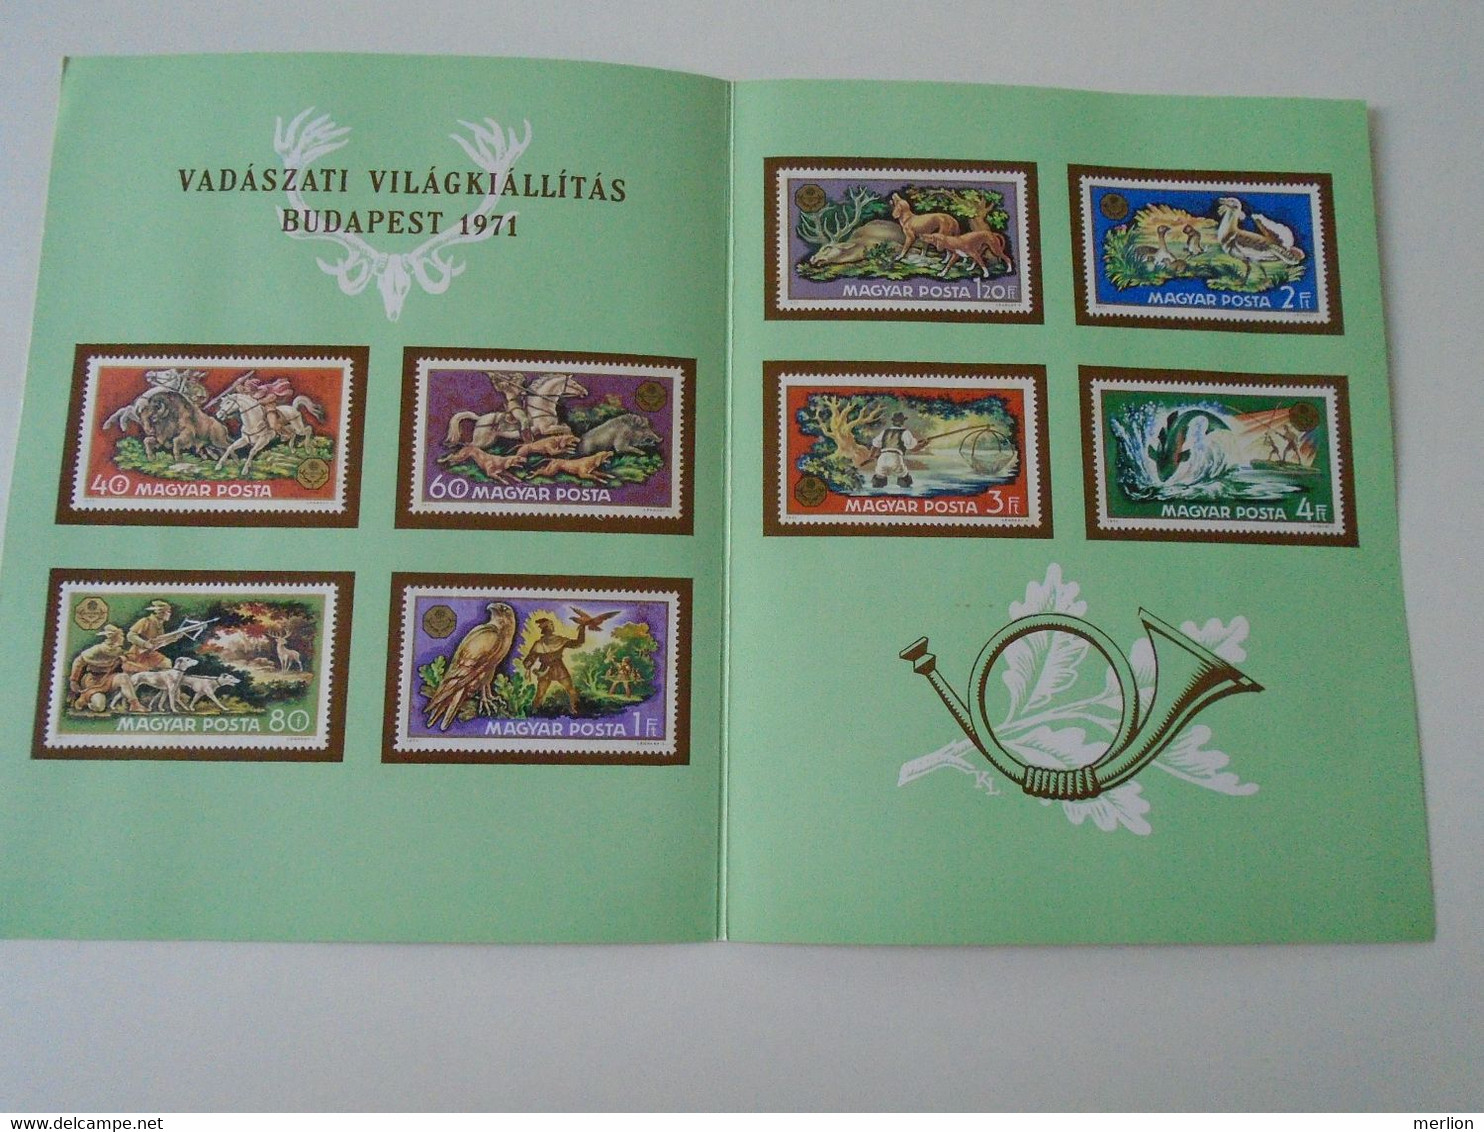 ZA374A001 Hungary  Jagd  Chasse  World Hunting Exhibition  1971  Budapest - Feuillets Souvenir